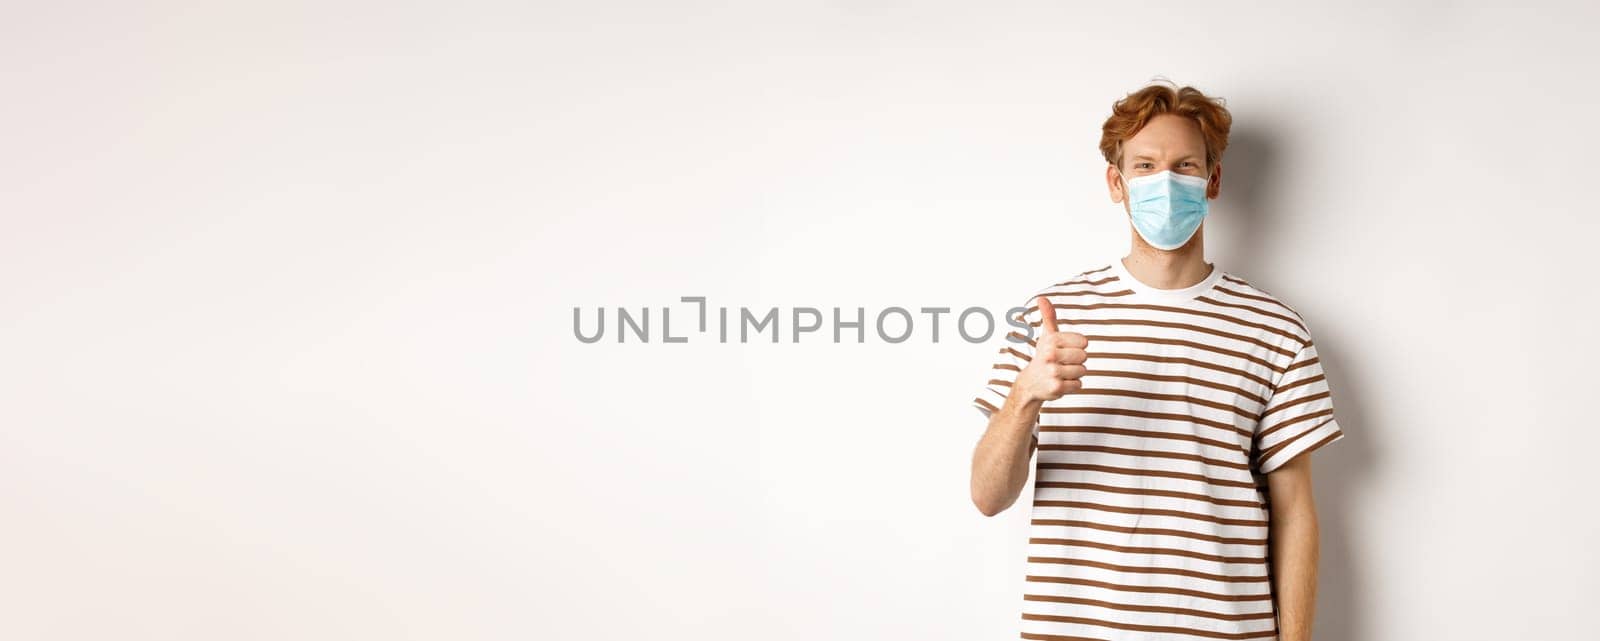 Covid-19, pandemic and social distancing concept. Young man with red hair wearing medical mask to prevent catching coronavirus, showing thumbs-up, white background by Benzoix